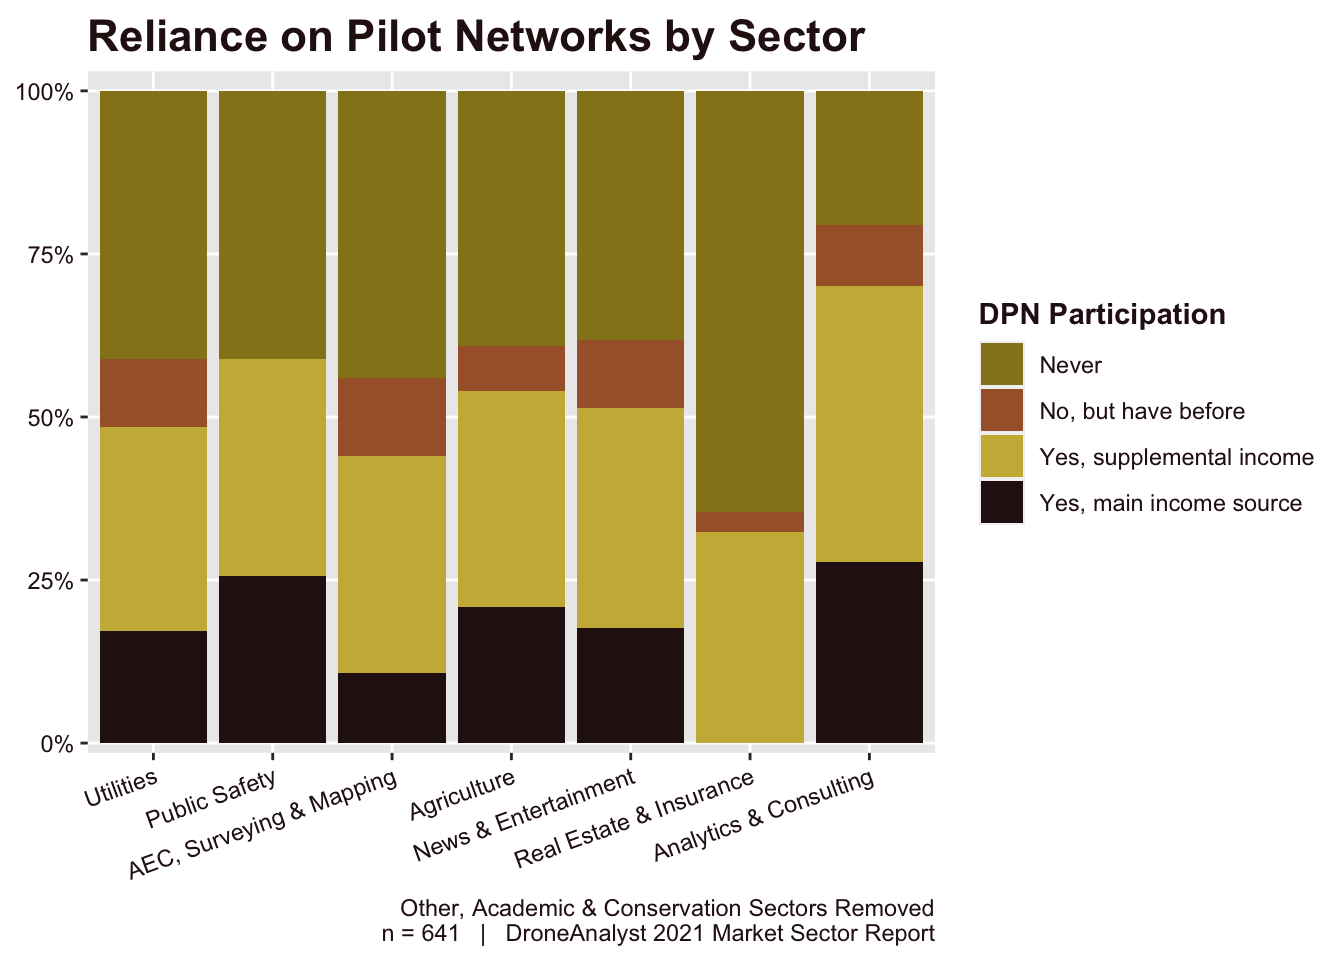 Pilot Network Share by Sector